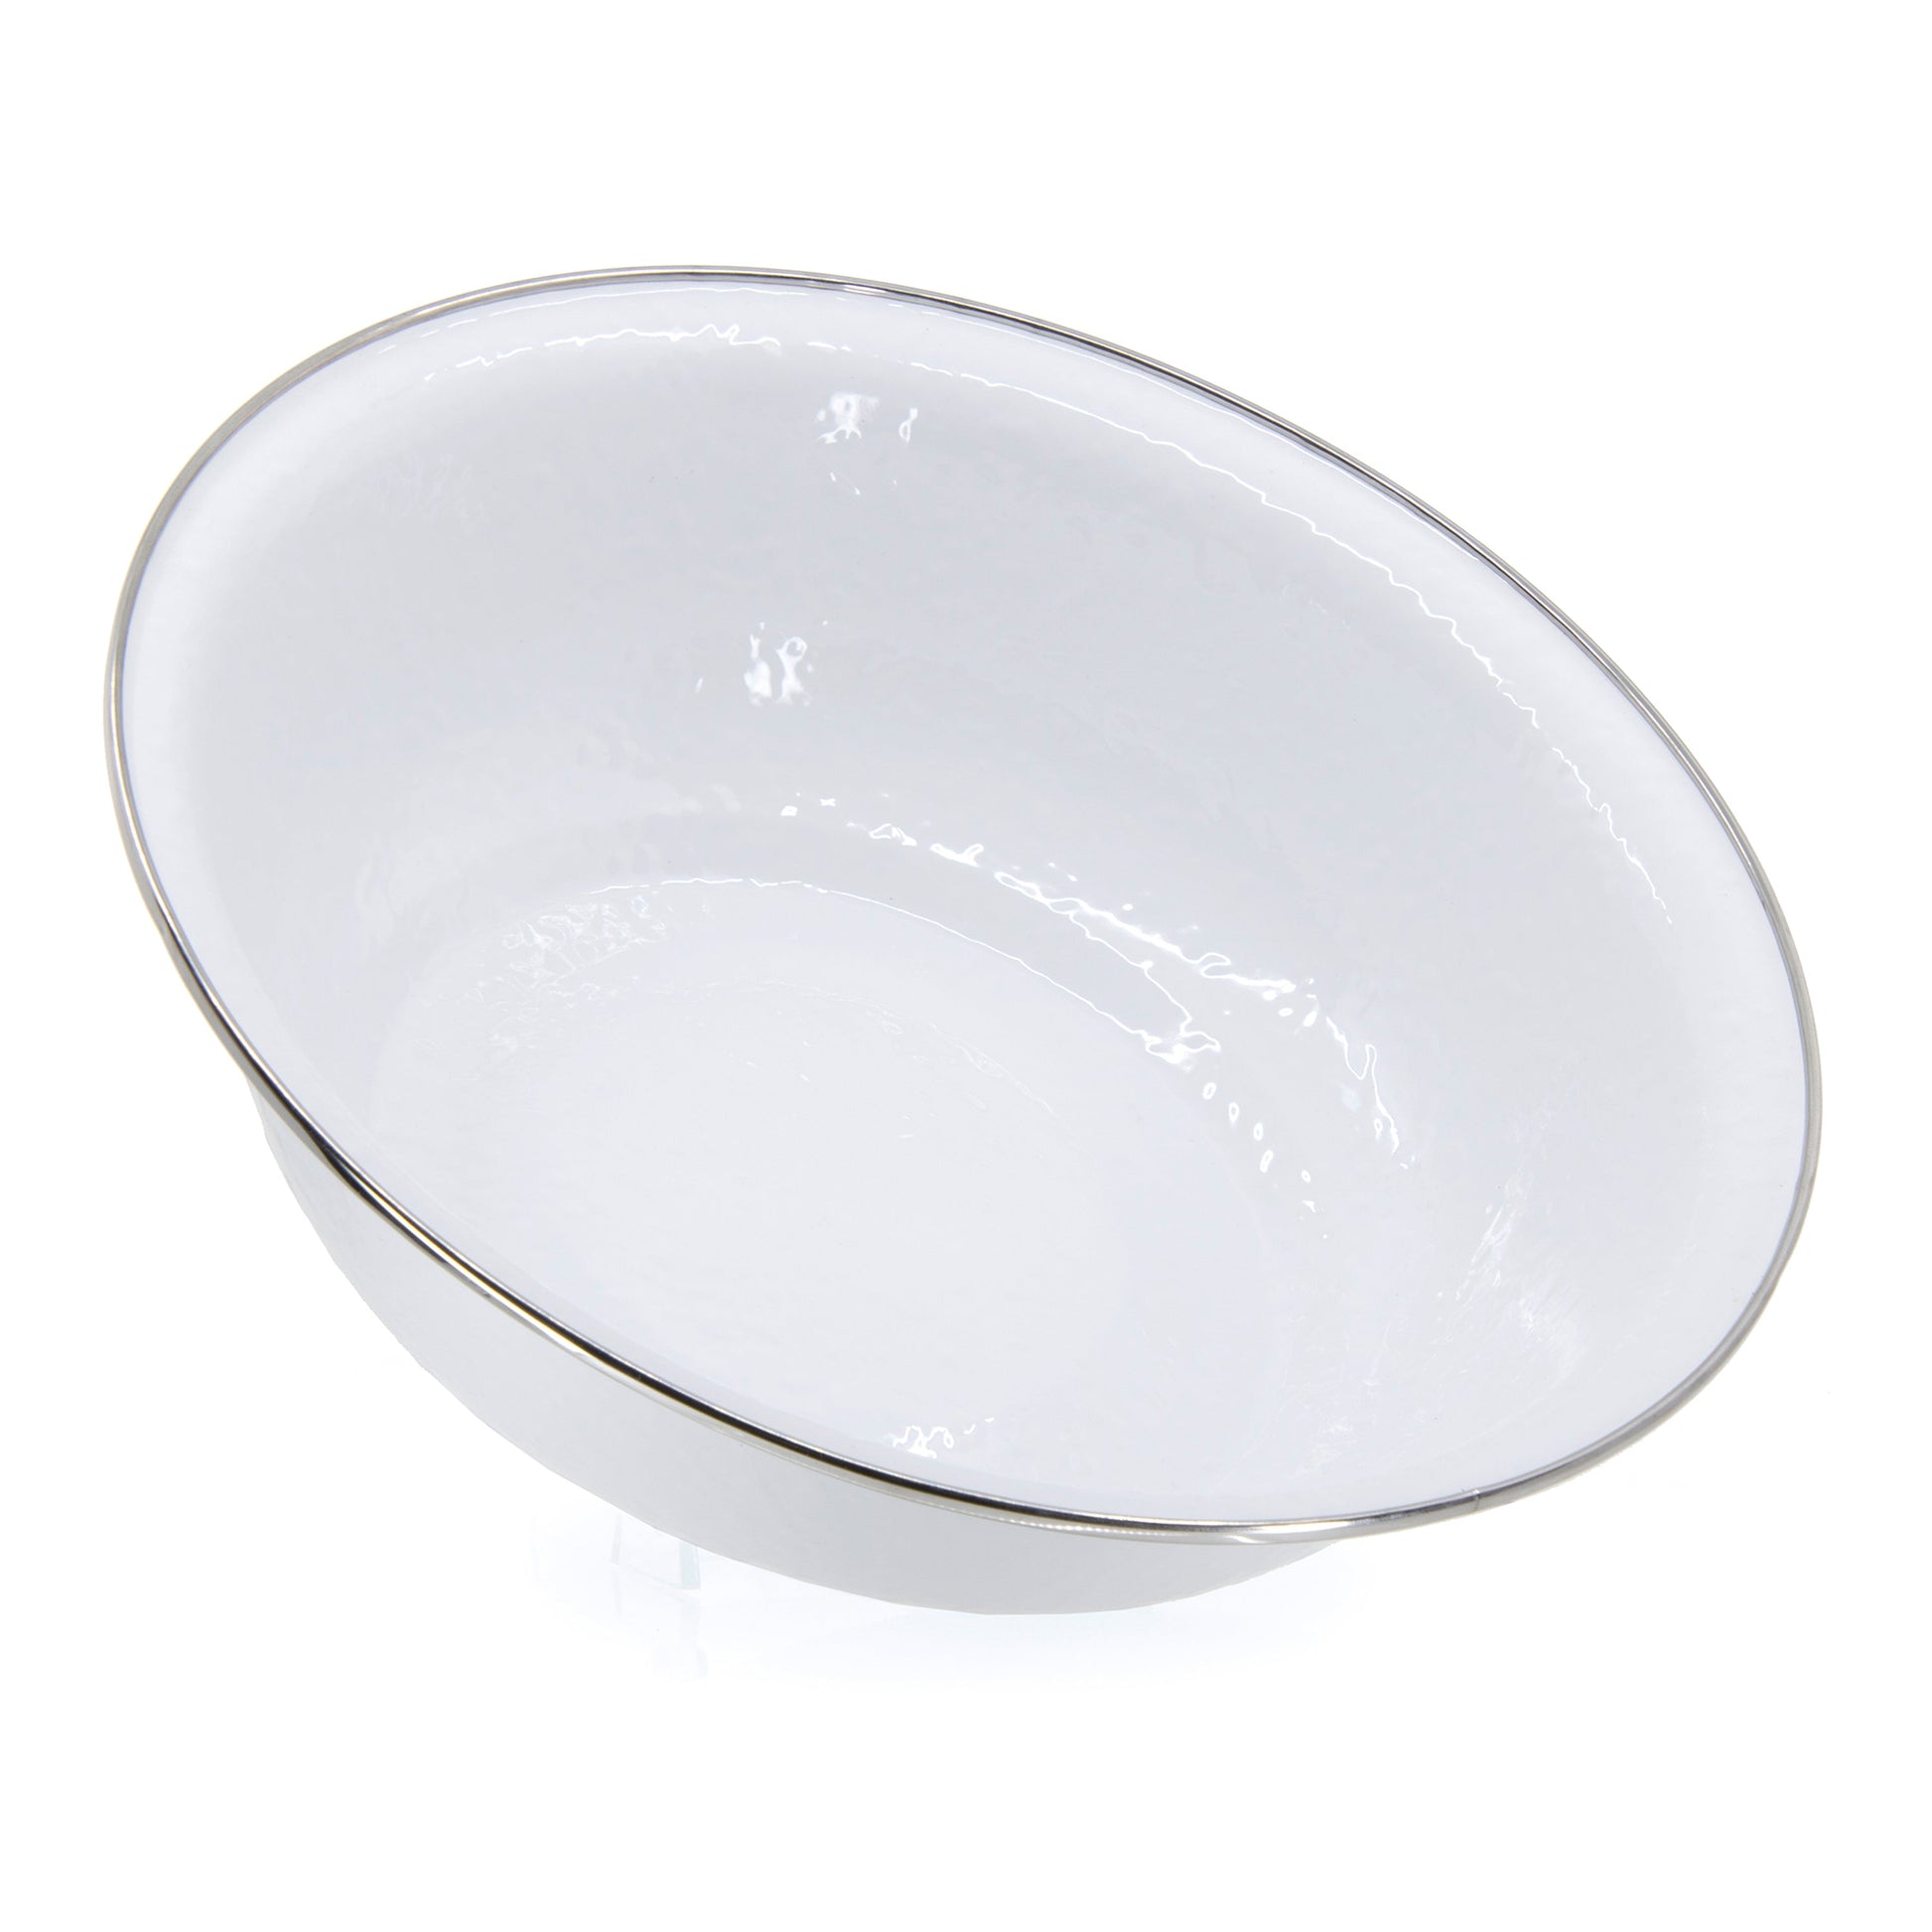 Classic White Serving Bowl-Serveware-Nautical Decor and Gifts